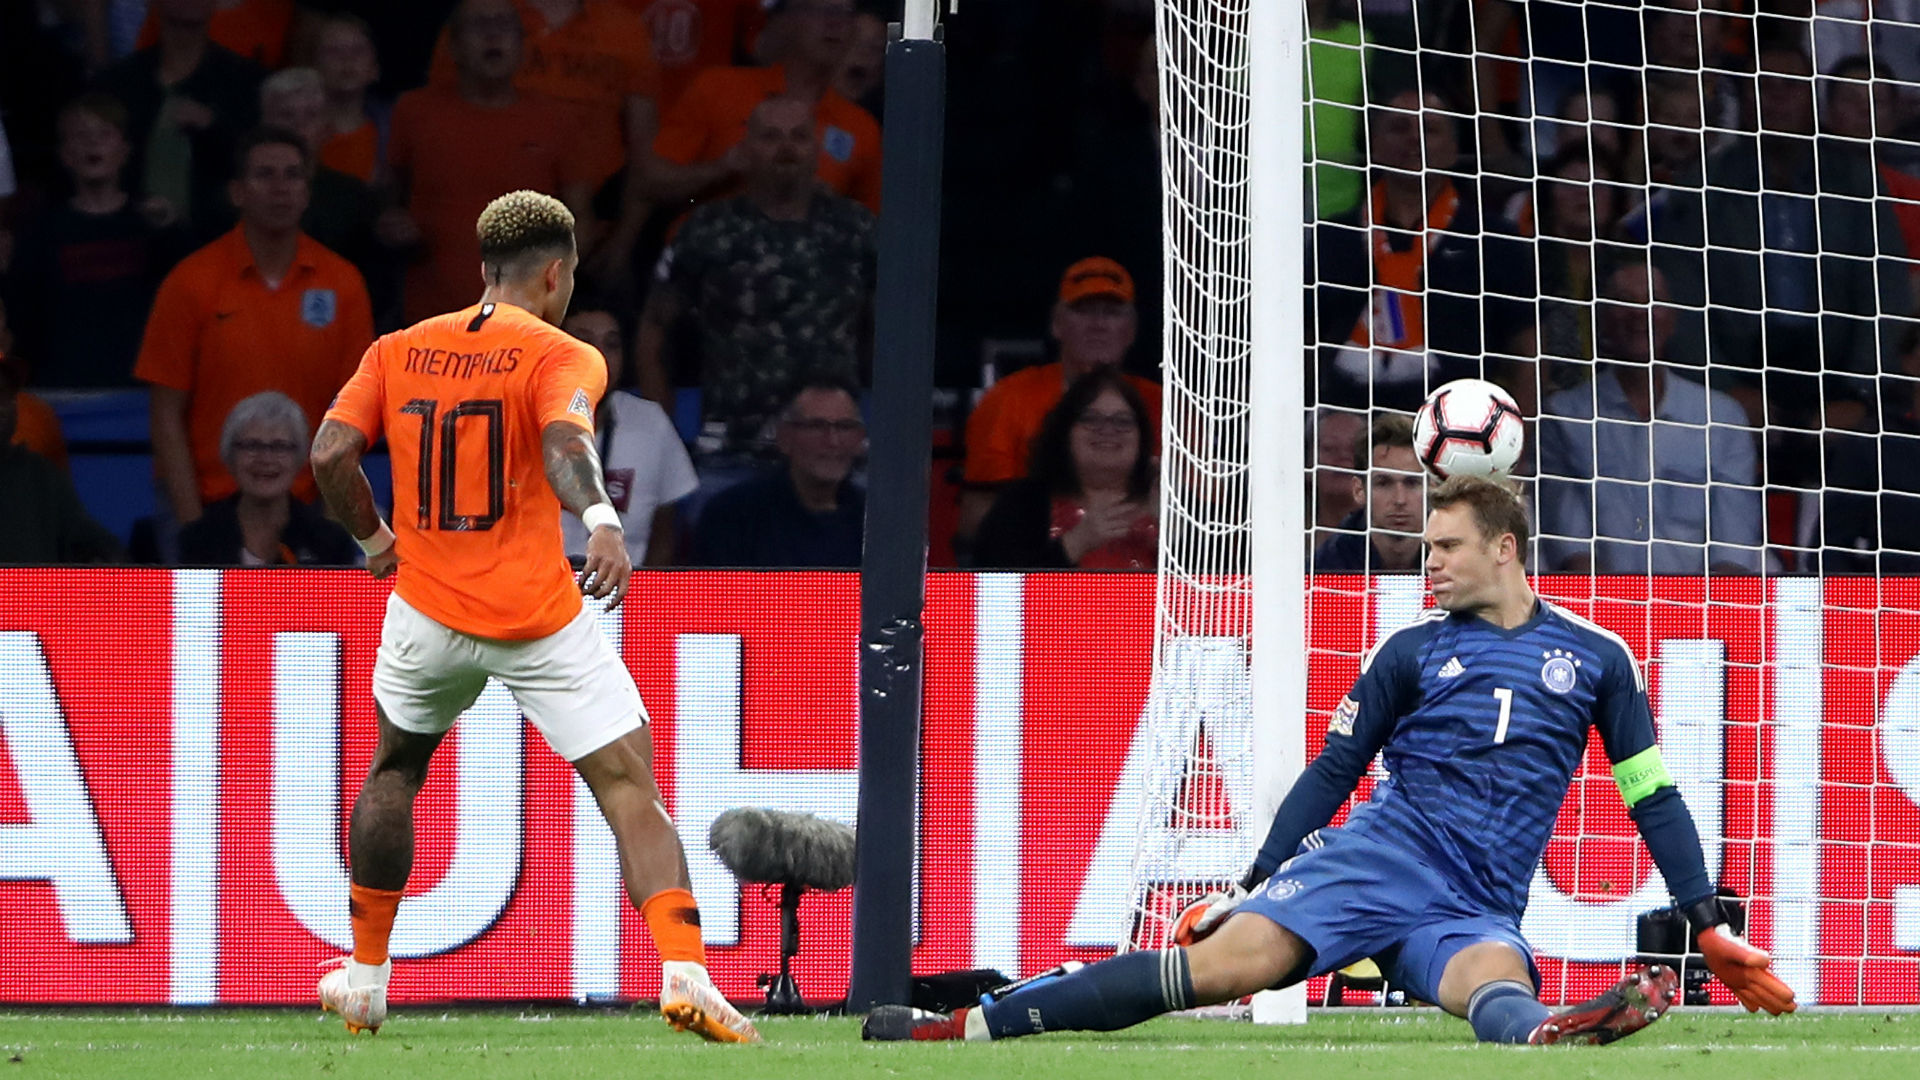 Germany Are Still Without A Goal In The Nations League - Netherland Vs Germany Results - HD Wallpaper 